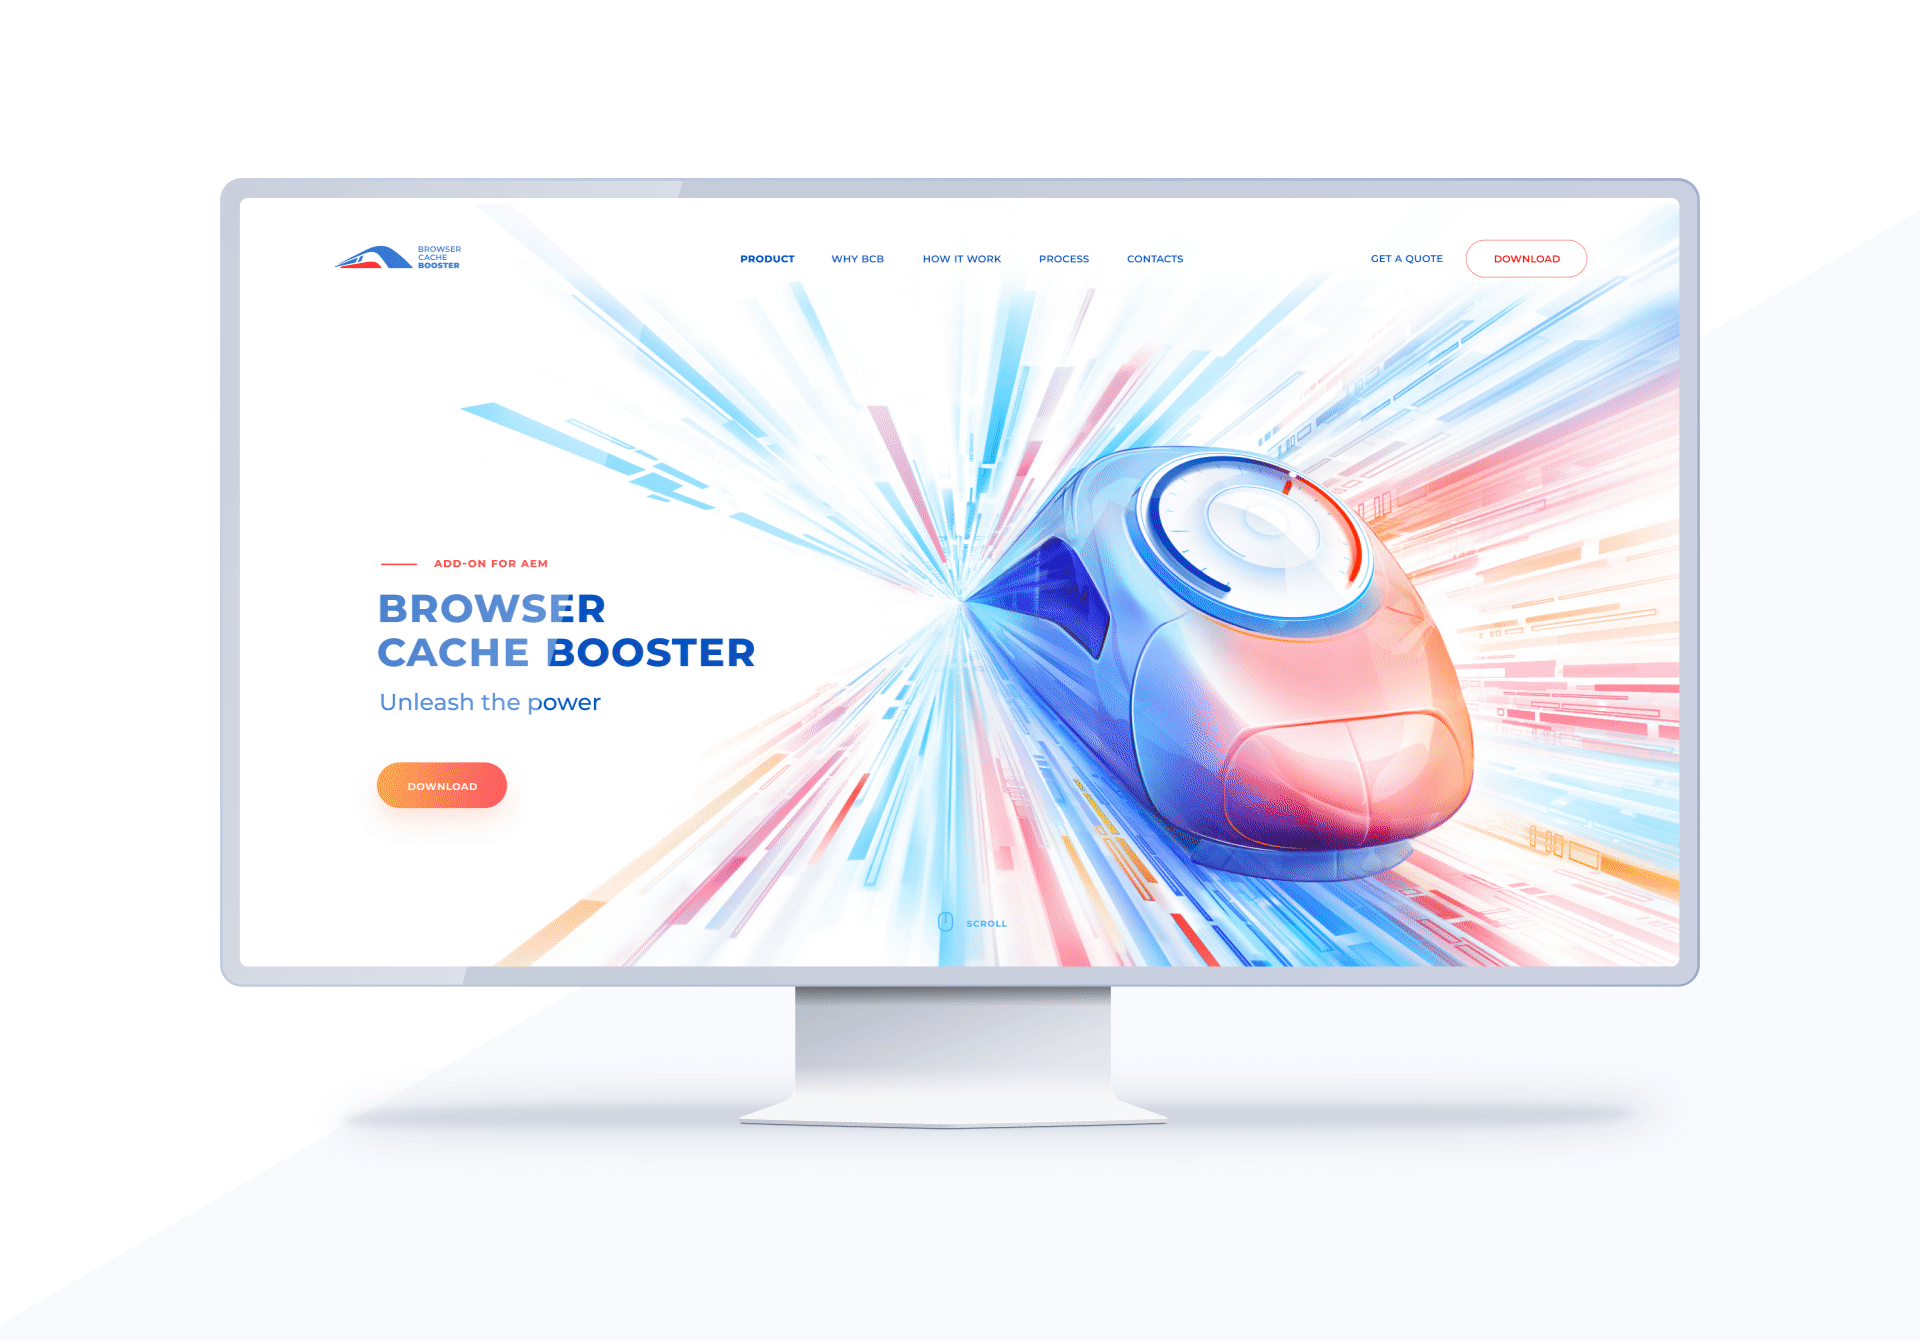 Browser Cache Booster